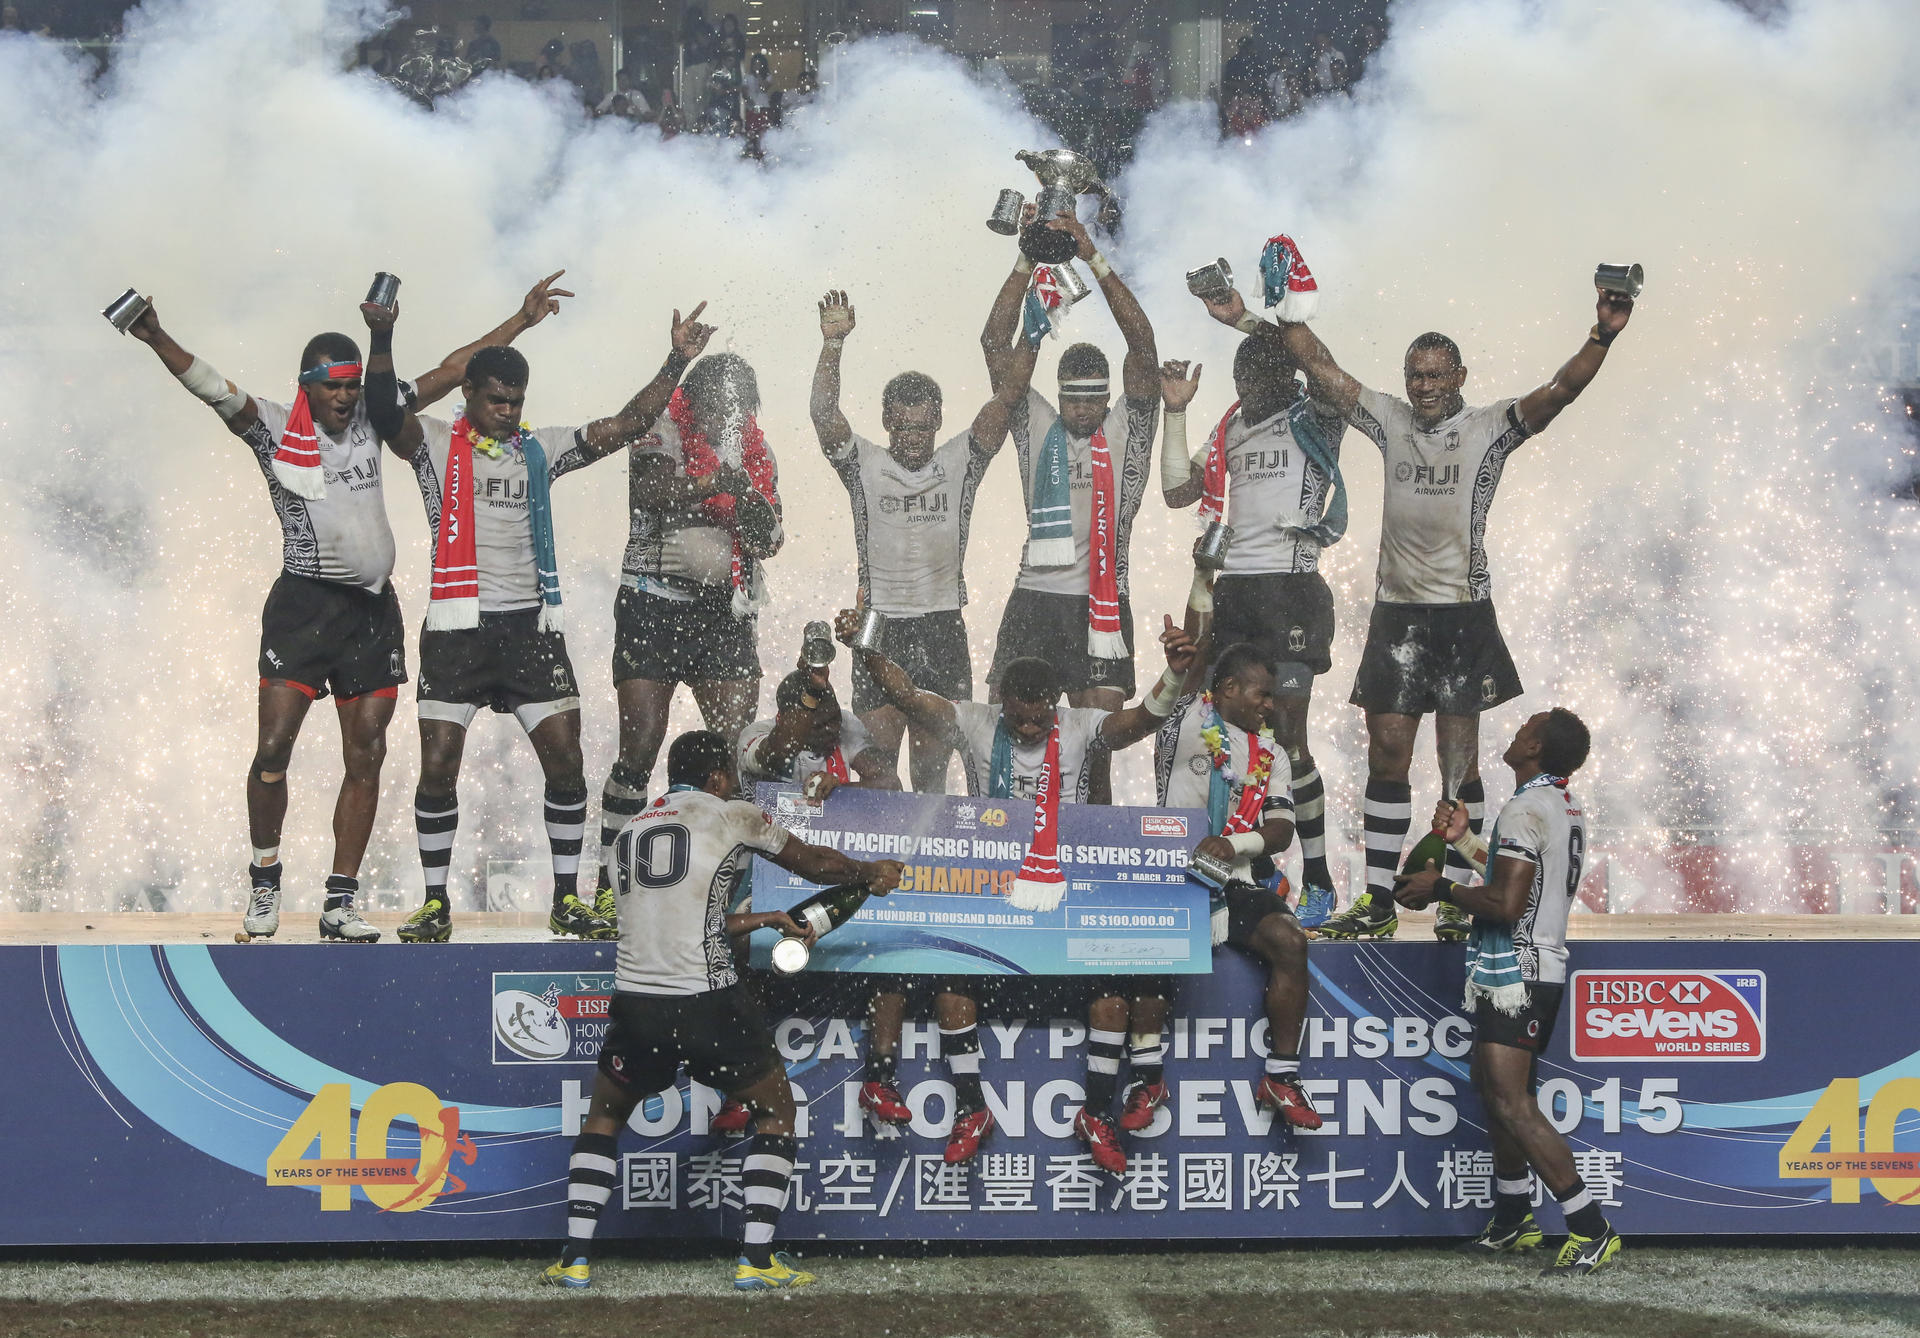 The bubbly flows as the outstanding Fiji squad celebrate their victory over New Zealand in the Cup final at the Hong Kong Sevens. Photo: Sam Tsang/SCMP